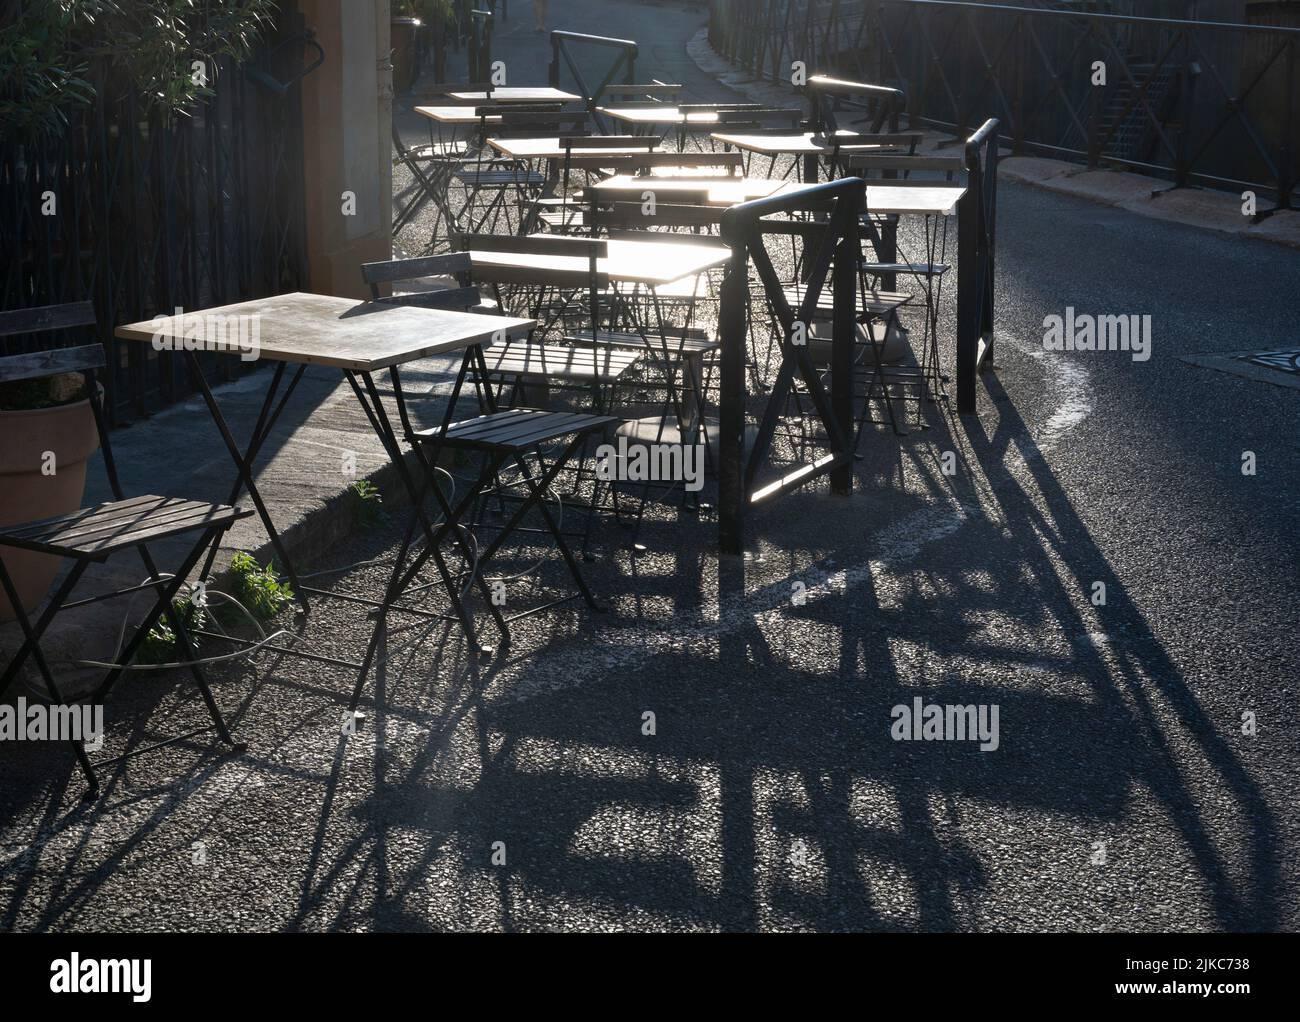 Arles, France. Empty cafe tables with shadows, in the heat of the day. Stock Photo